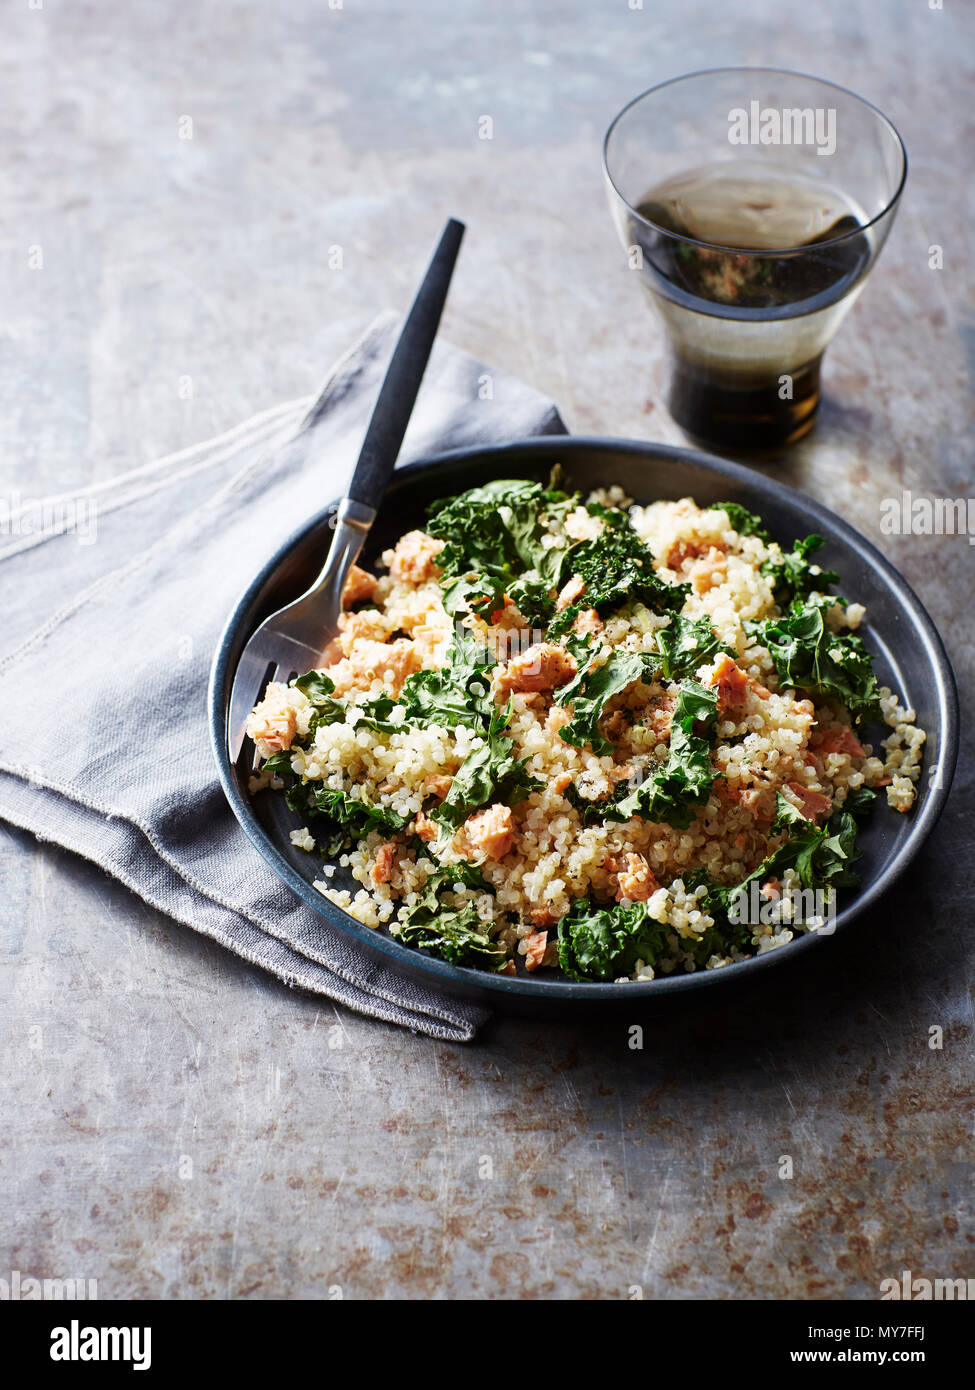 Still life with bowl of quinoa salmon kale salad, overhead view Stock Photo